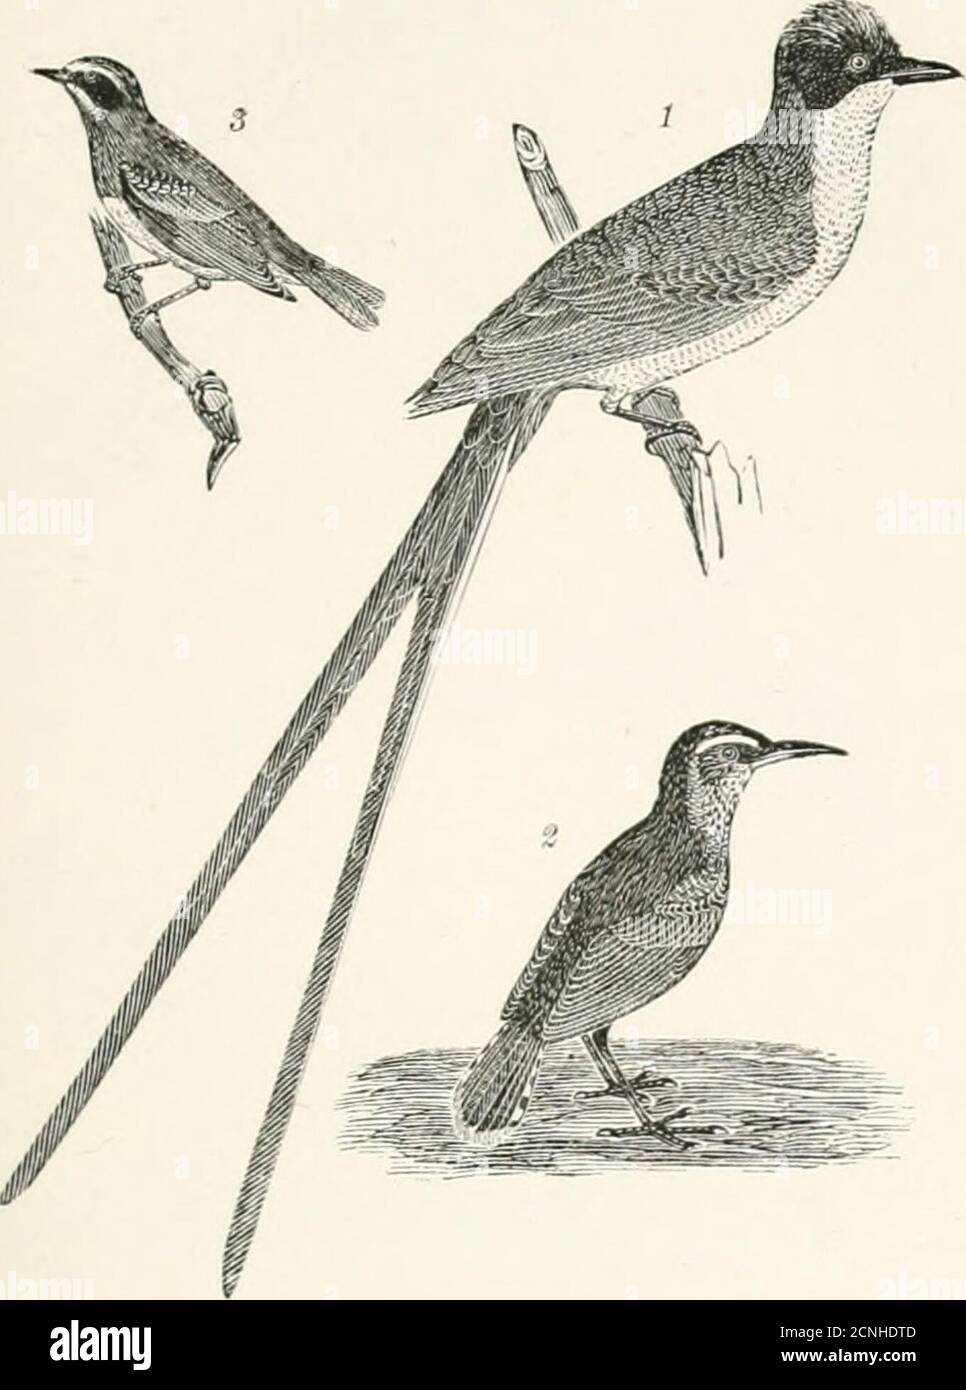 . American ornithology, or, The natural history of the birds of the United States : illustrated with plates engraved from drawings from nature . PLATli H, 1.—1. Fork-taik-d Flyeatclii-r. 2. Kocky Muuii- Plate B, 2.—1. .Swallow-tailed l-lycatcher. 2. Arkansas tain Aiitcatclicr. :!. ILiualc (inKlcn-wingcd Uaibler. Flycatcher. 3. Says Flycaldier. 4. Female Golden-crested Wren.. Stock Photo